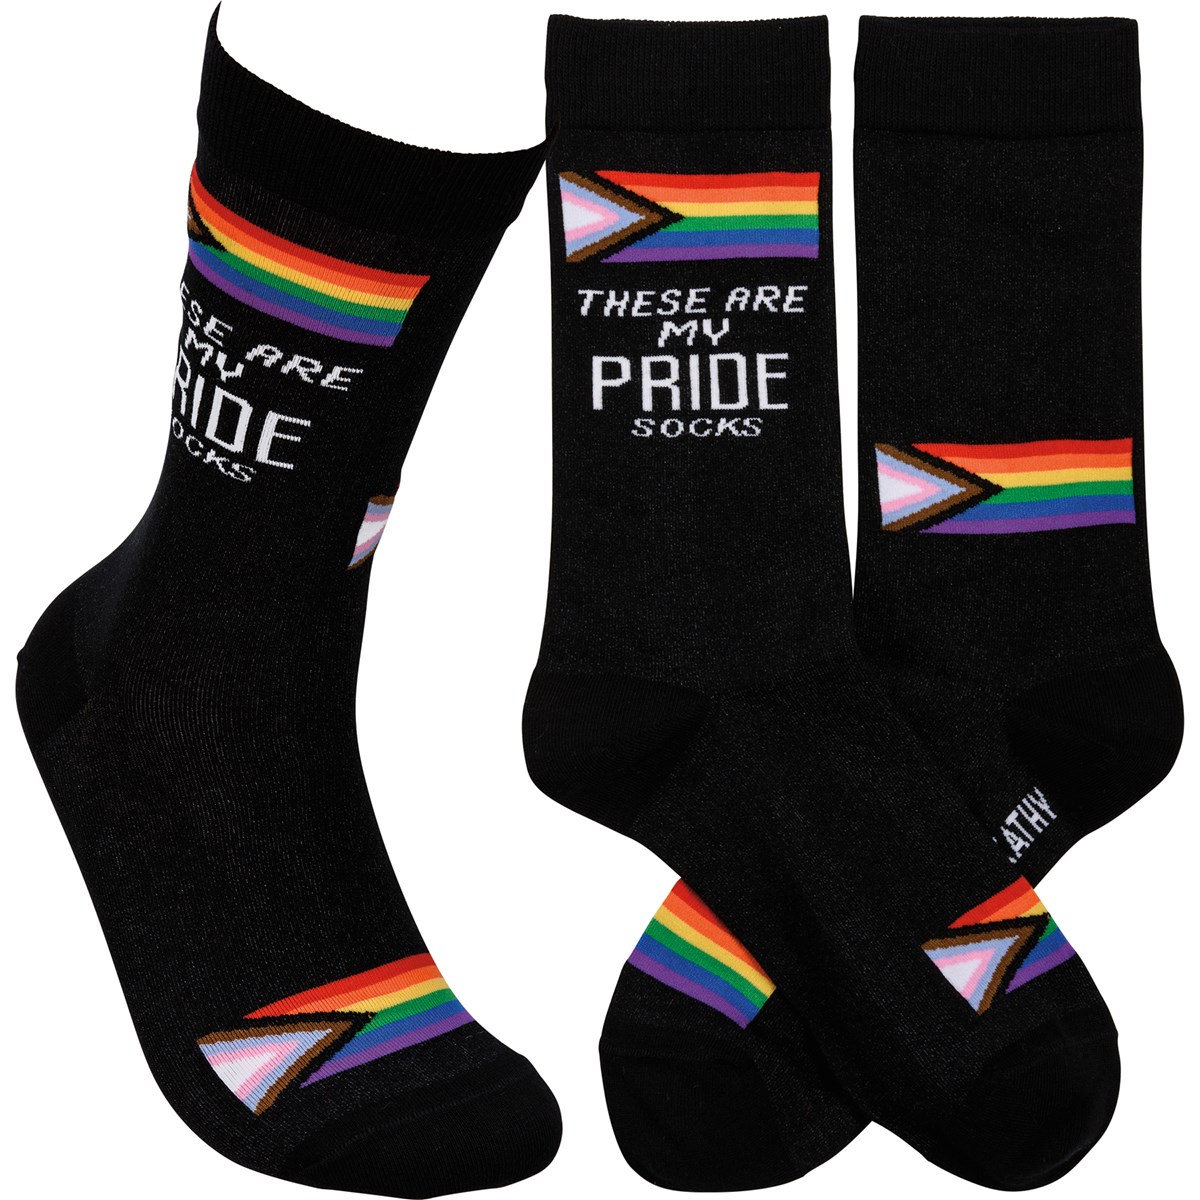 Socks - These Are My Pride Socks - One Size Fits Most - Cotton, Nylon, Spandex